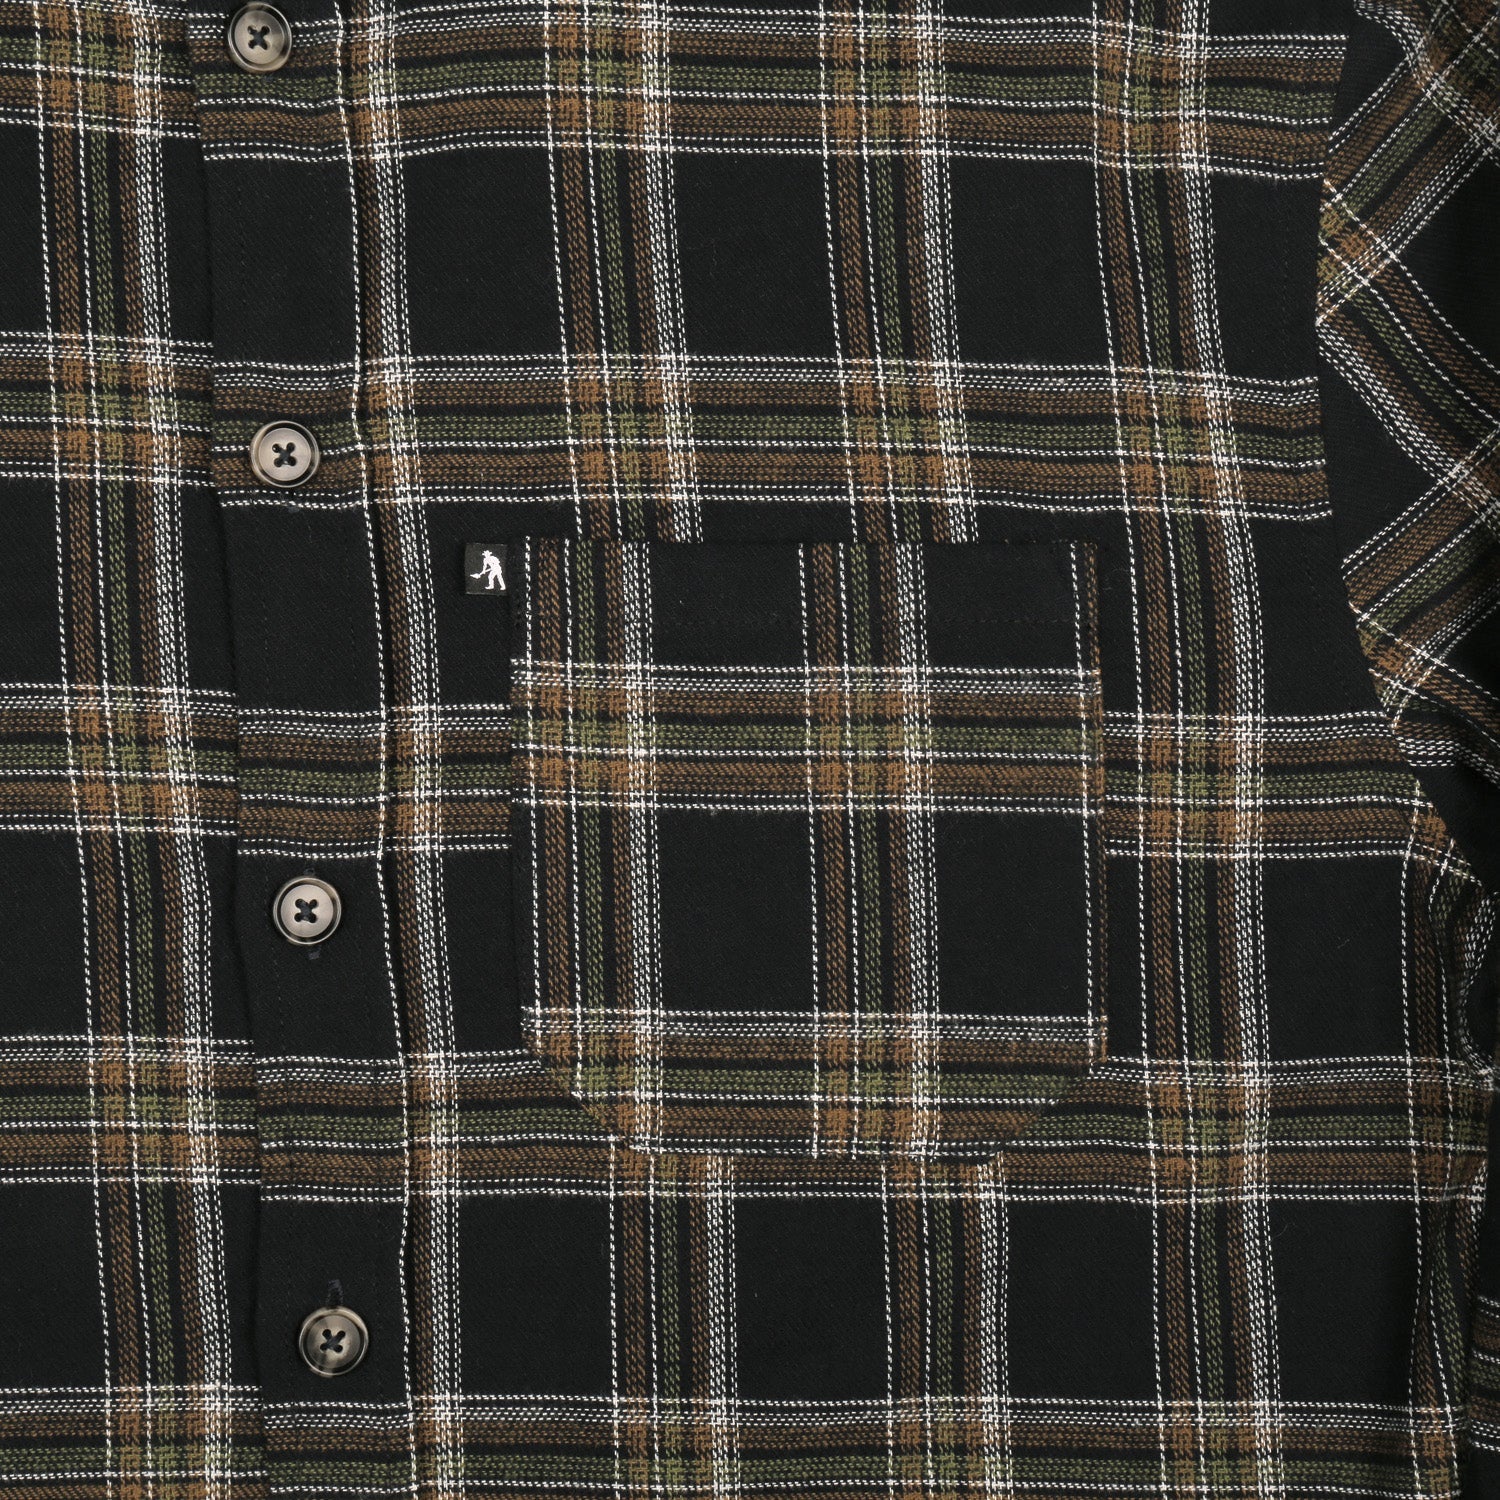 Workers Flannel (Navy)